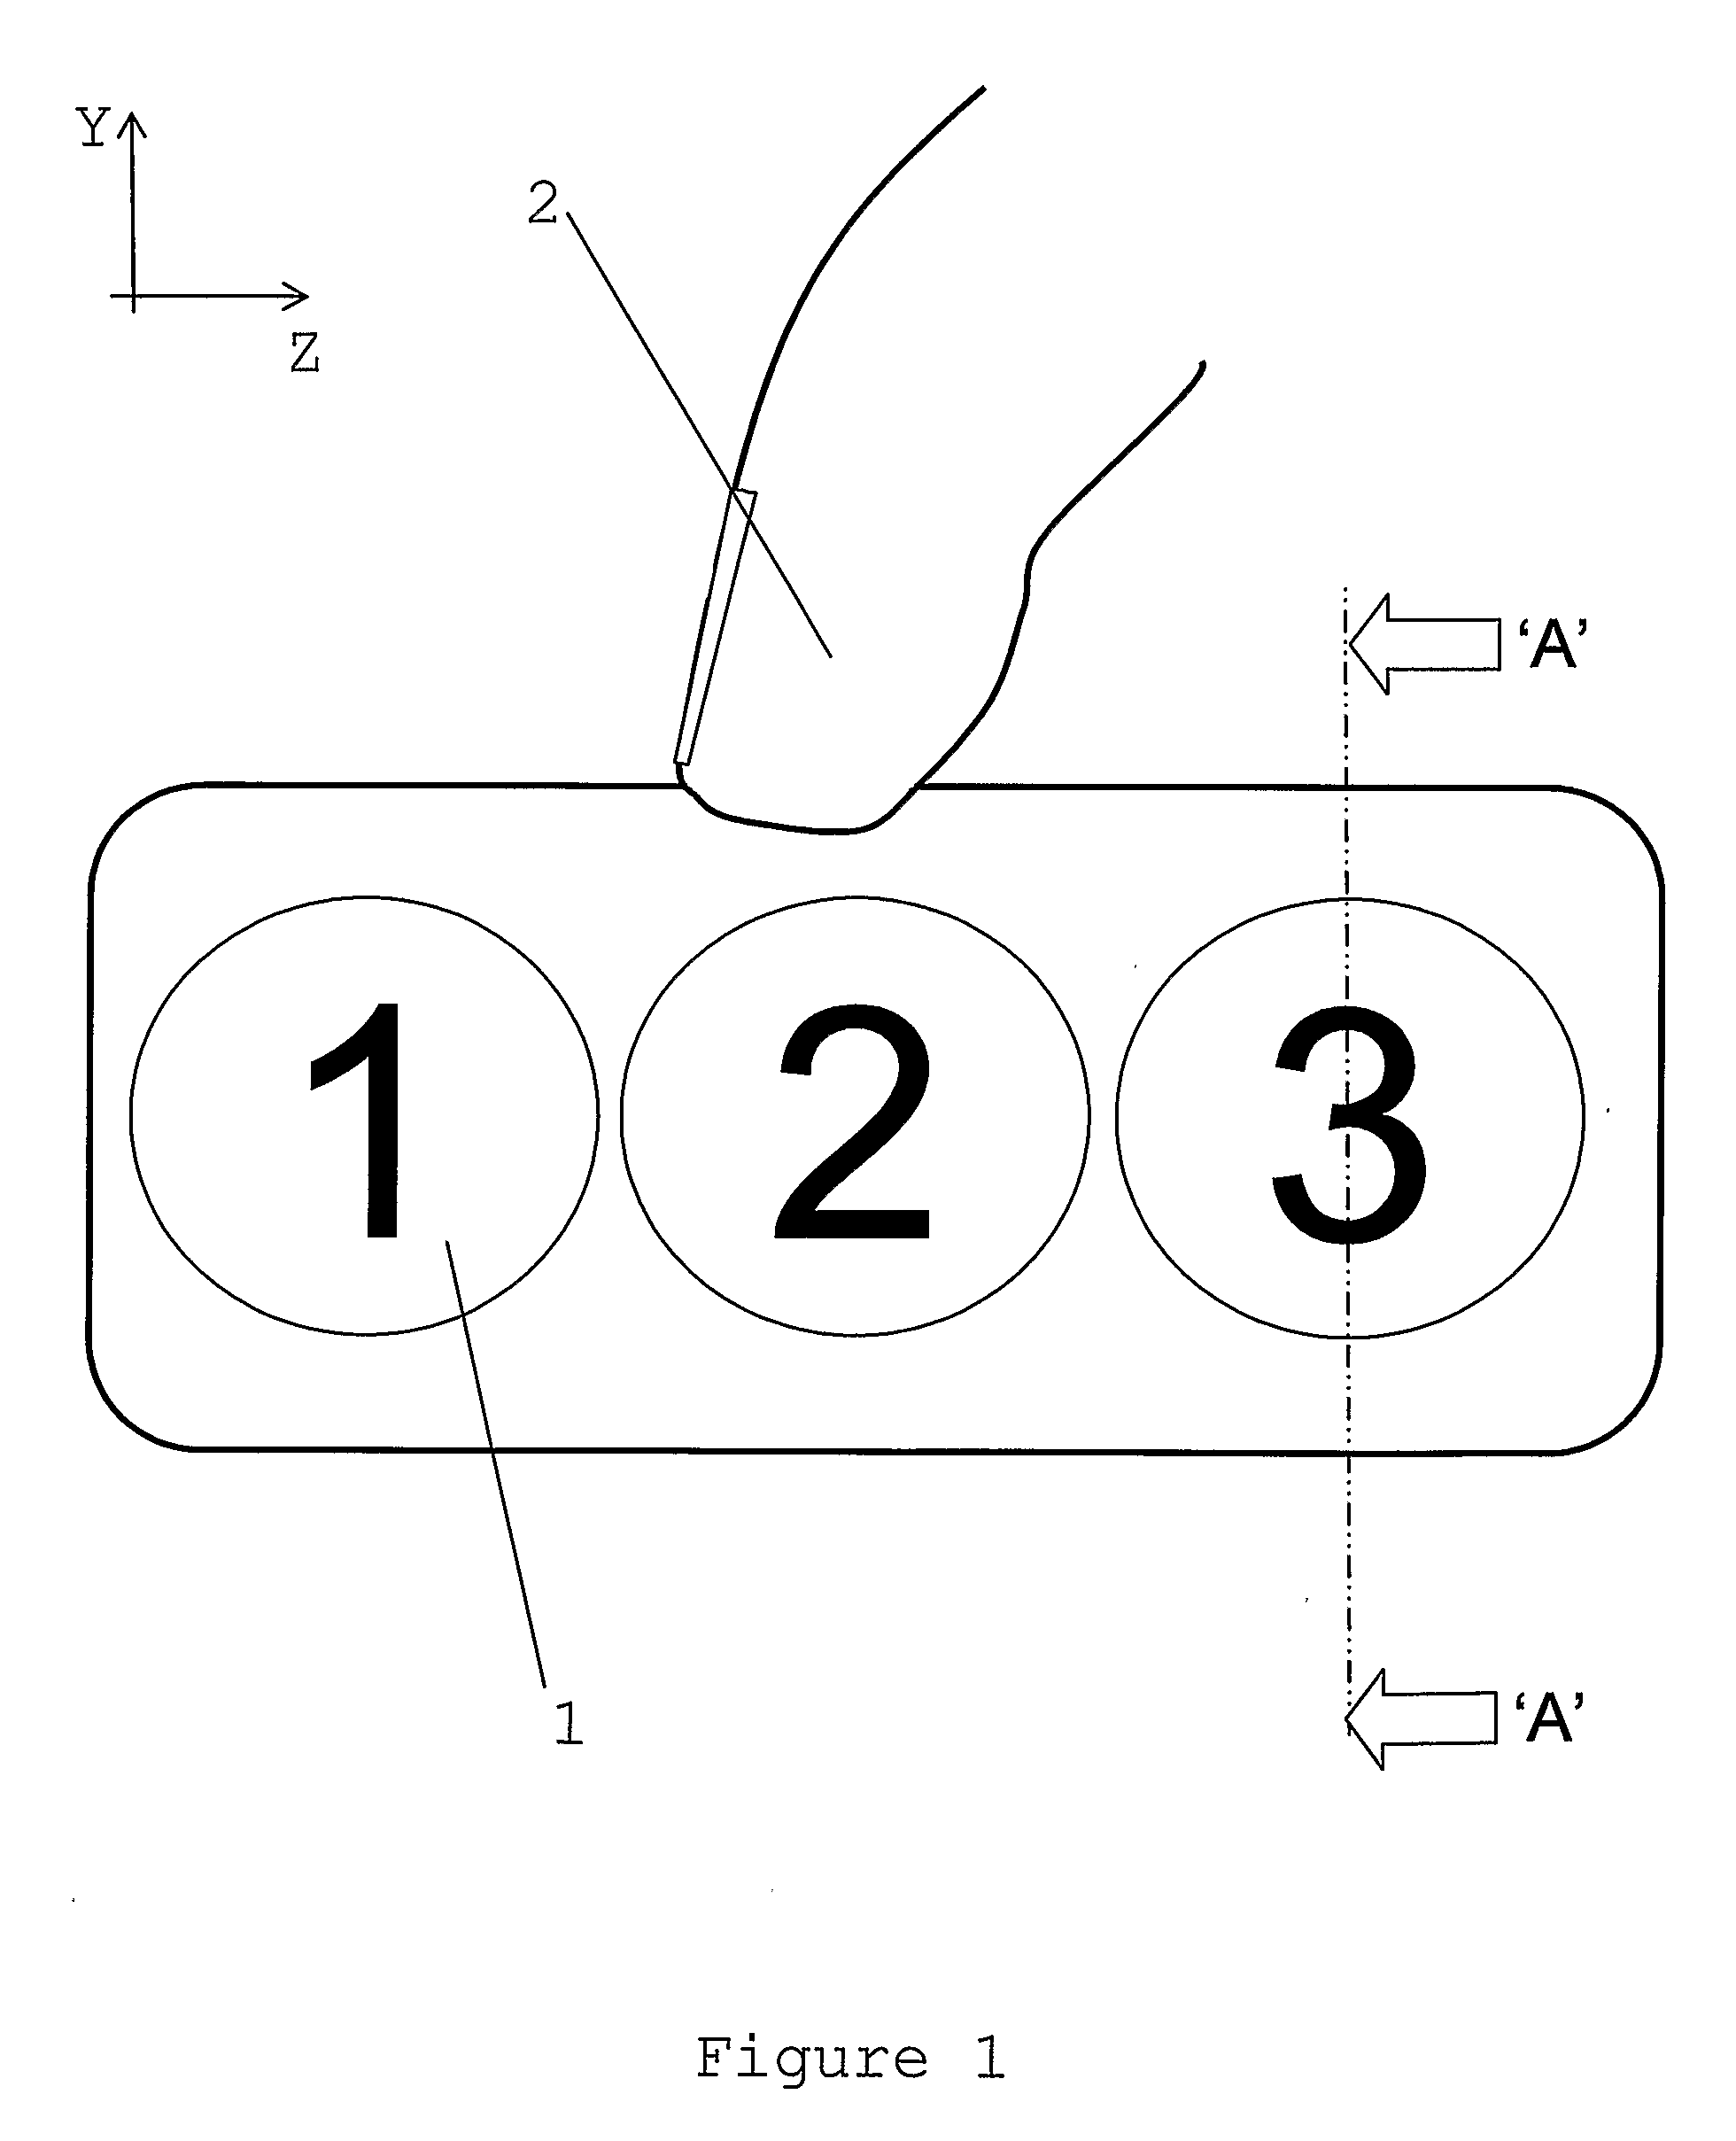 Pressure sensitive inductive detector for use in user interfaces